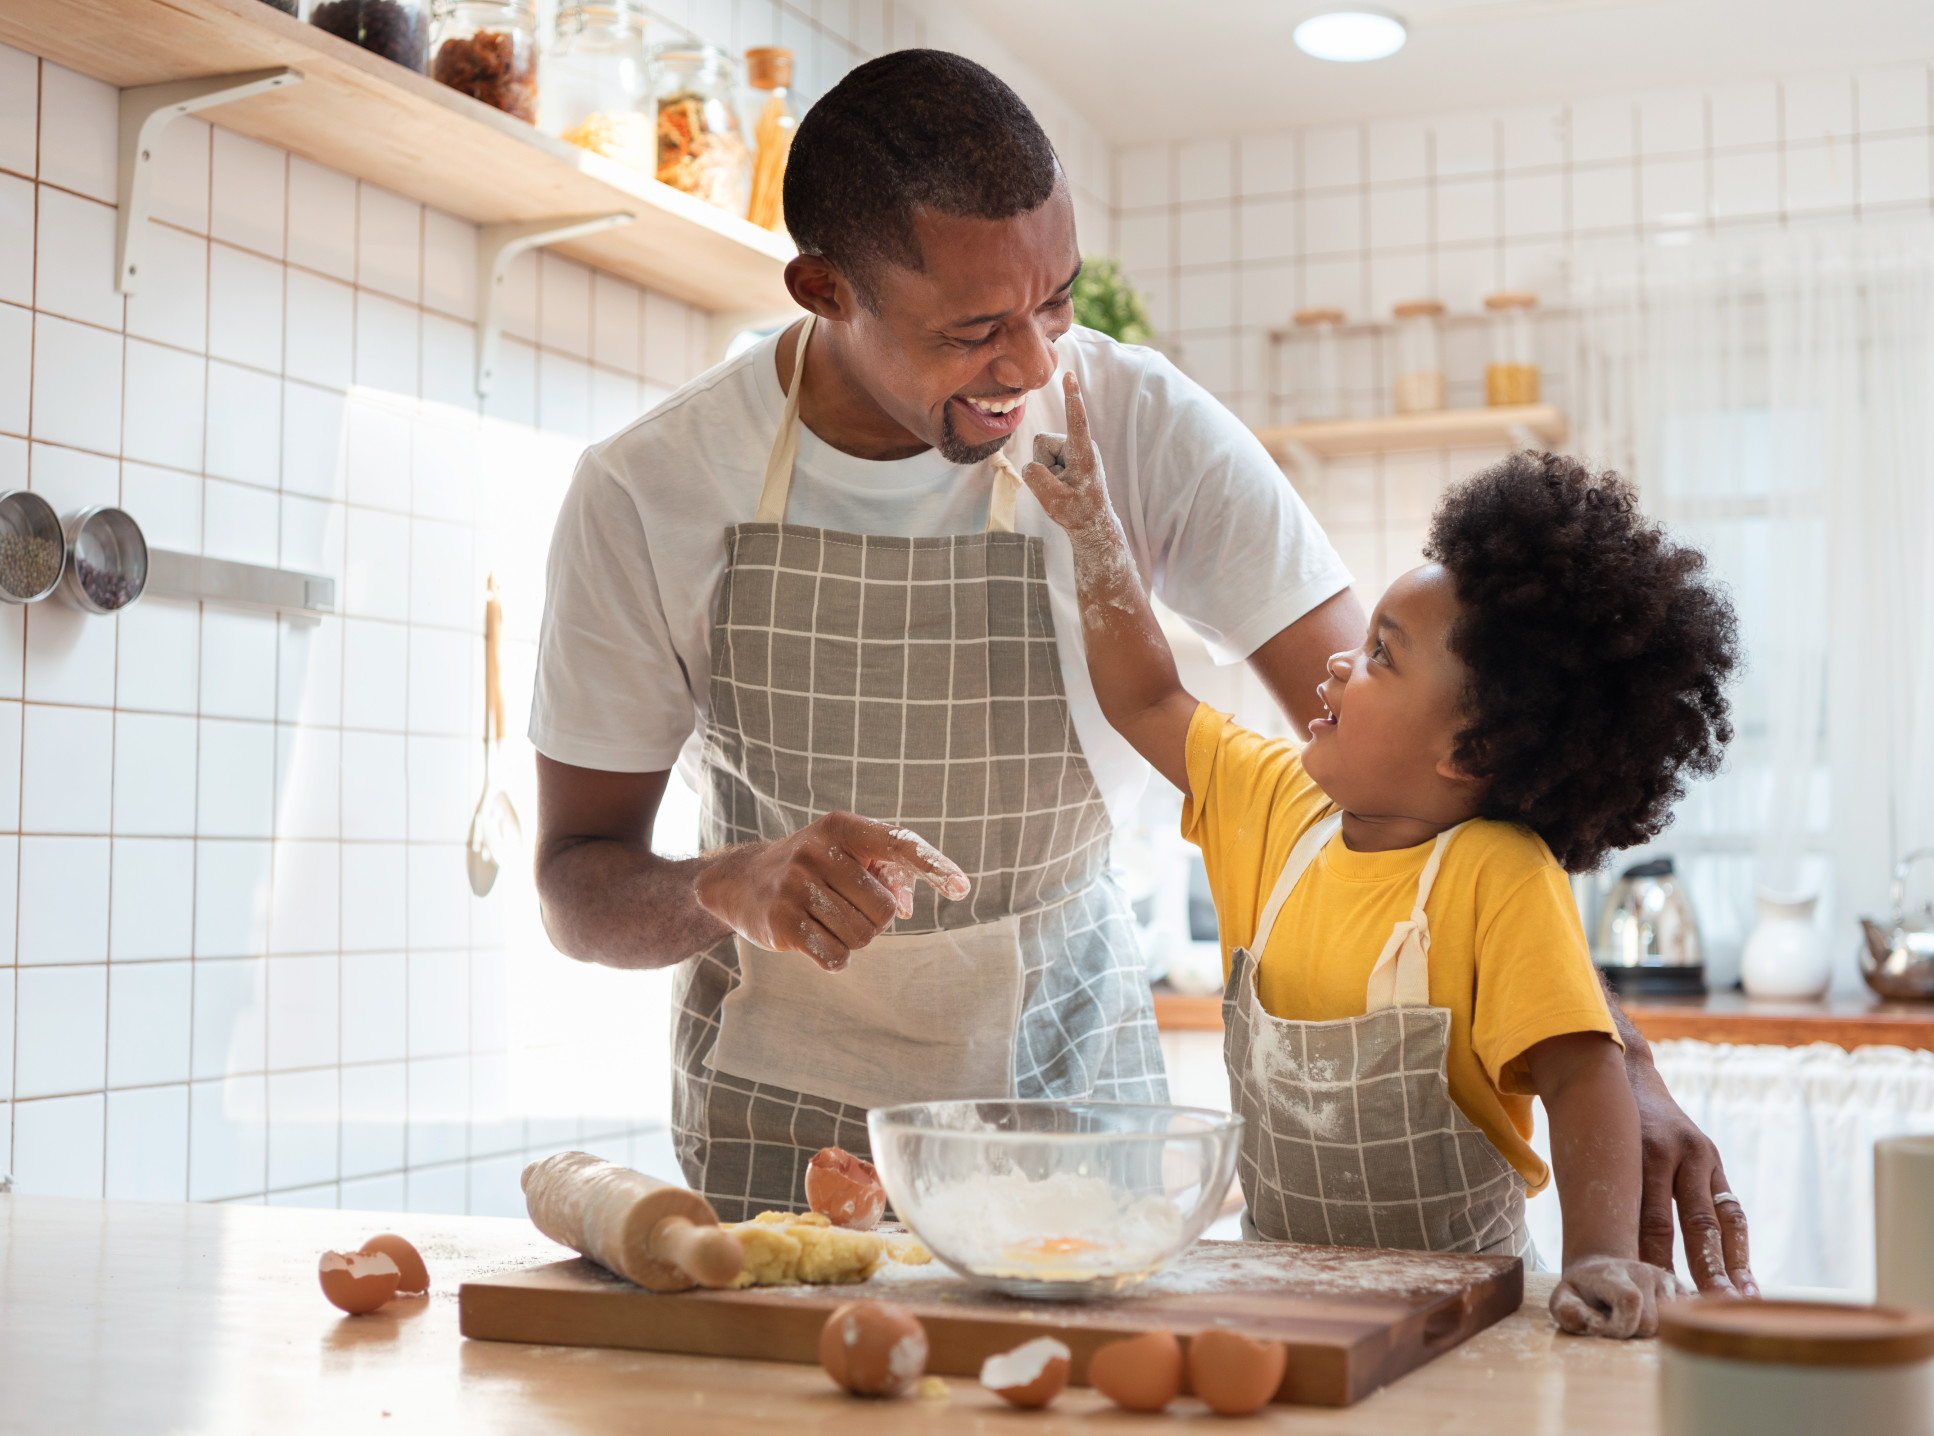 Black man and young boy baking in a kitchen